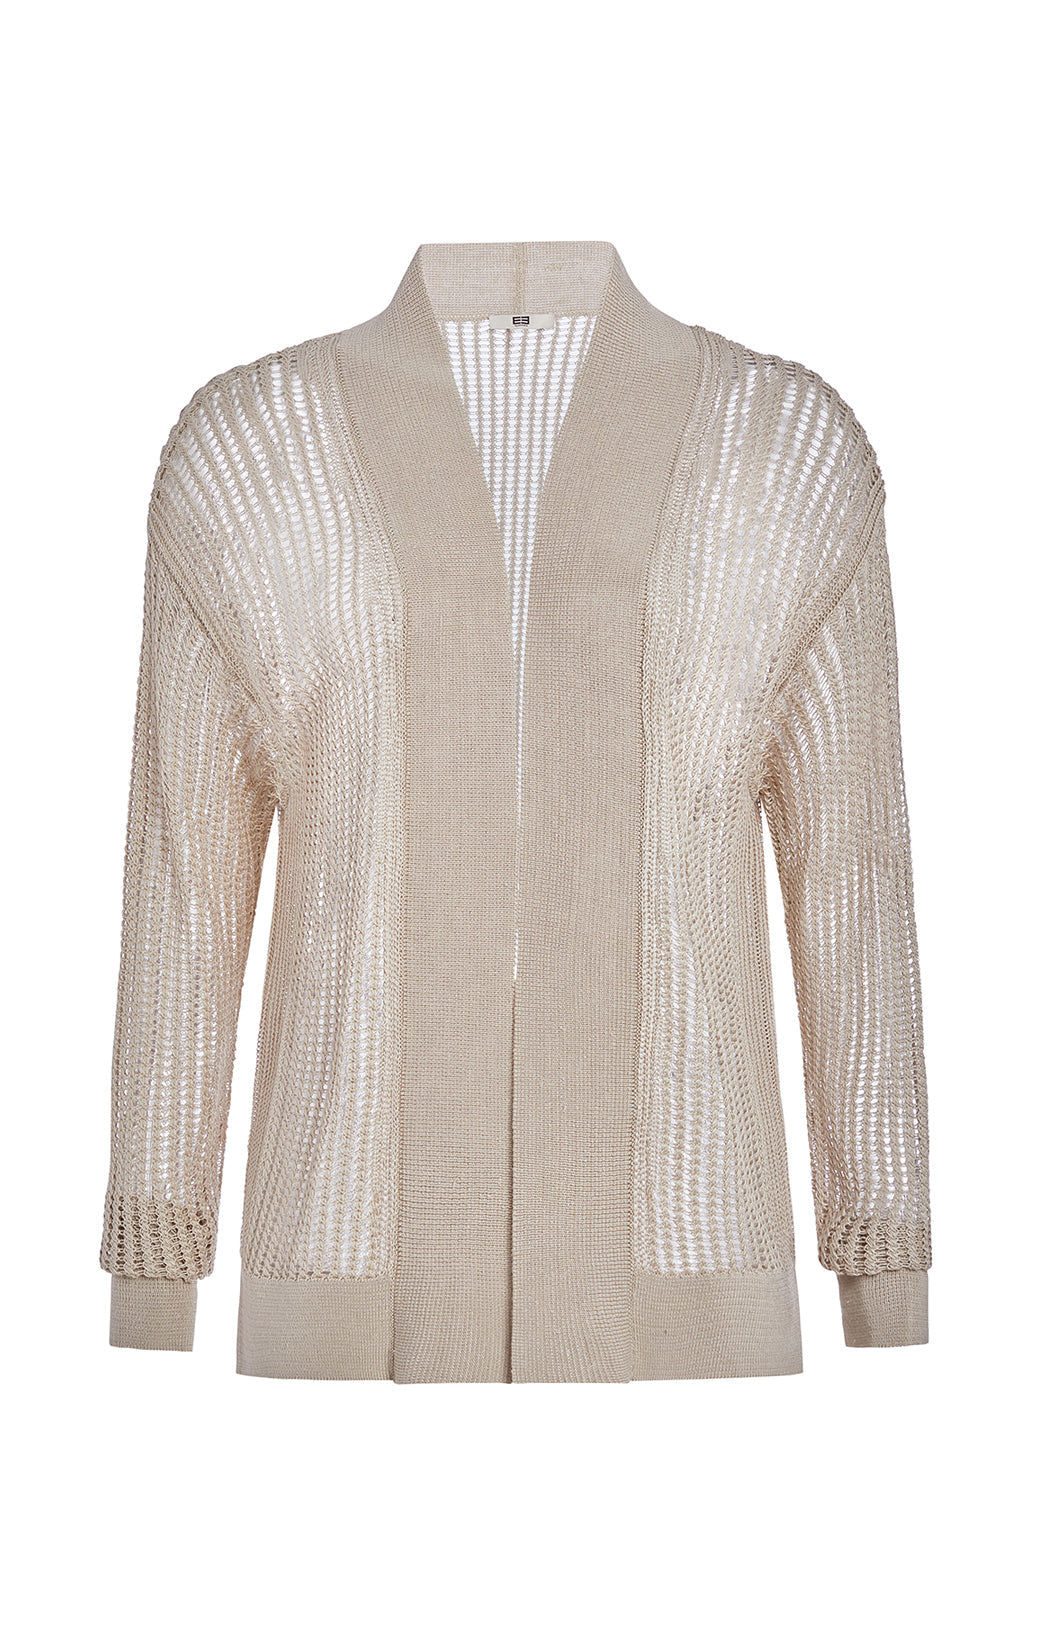 Sea Campion - Pullover Linen Mesh Knit Top - Product Image